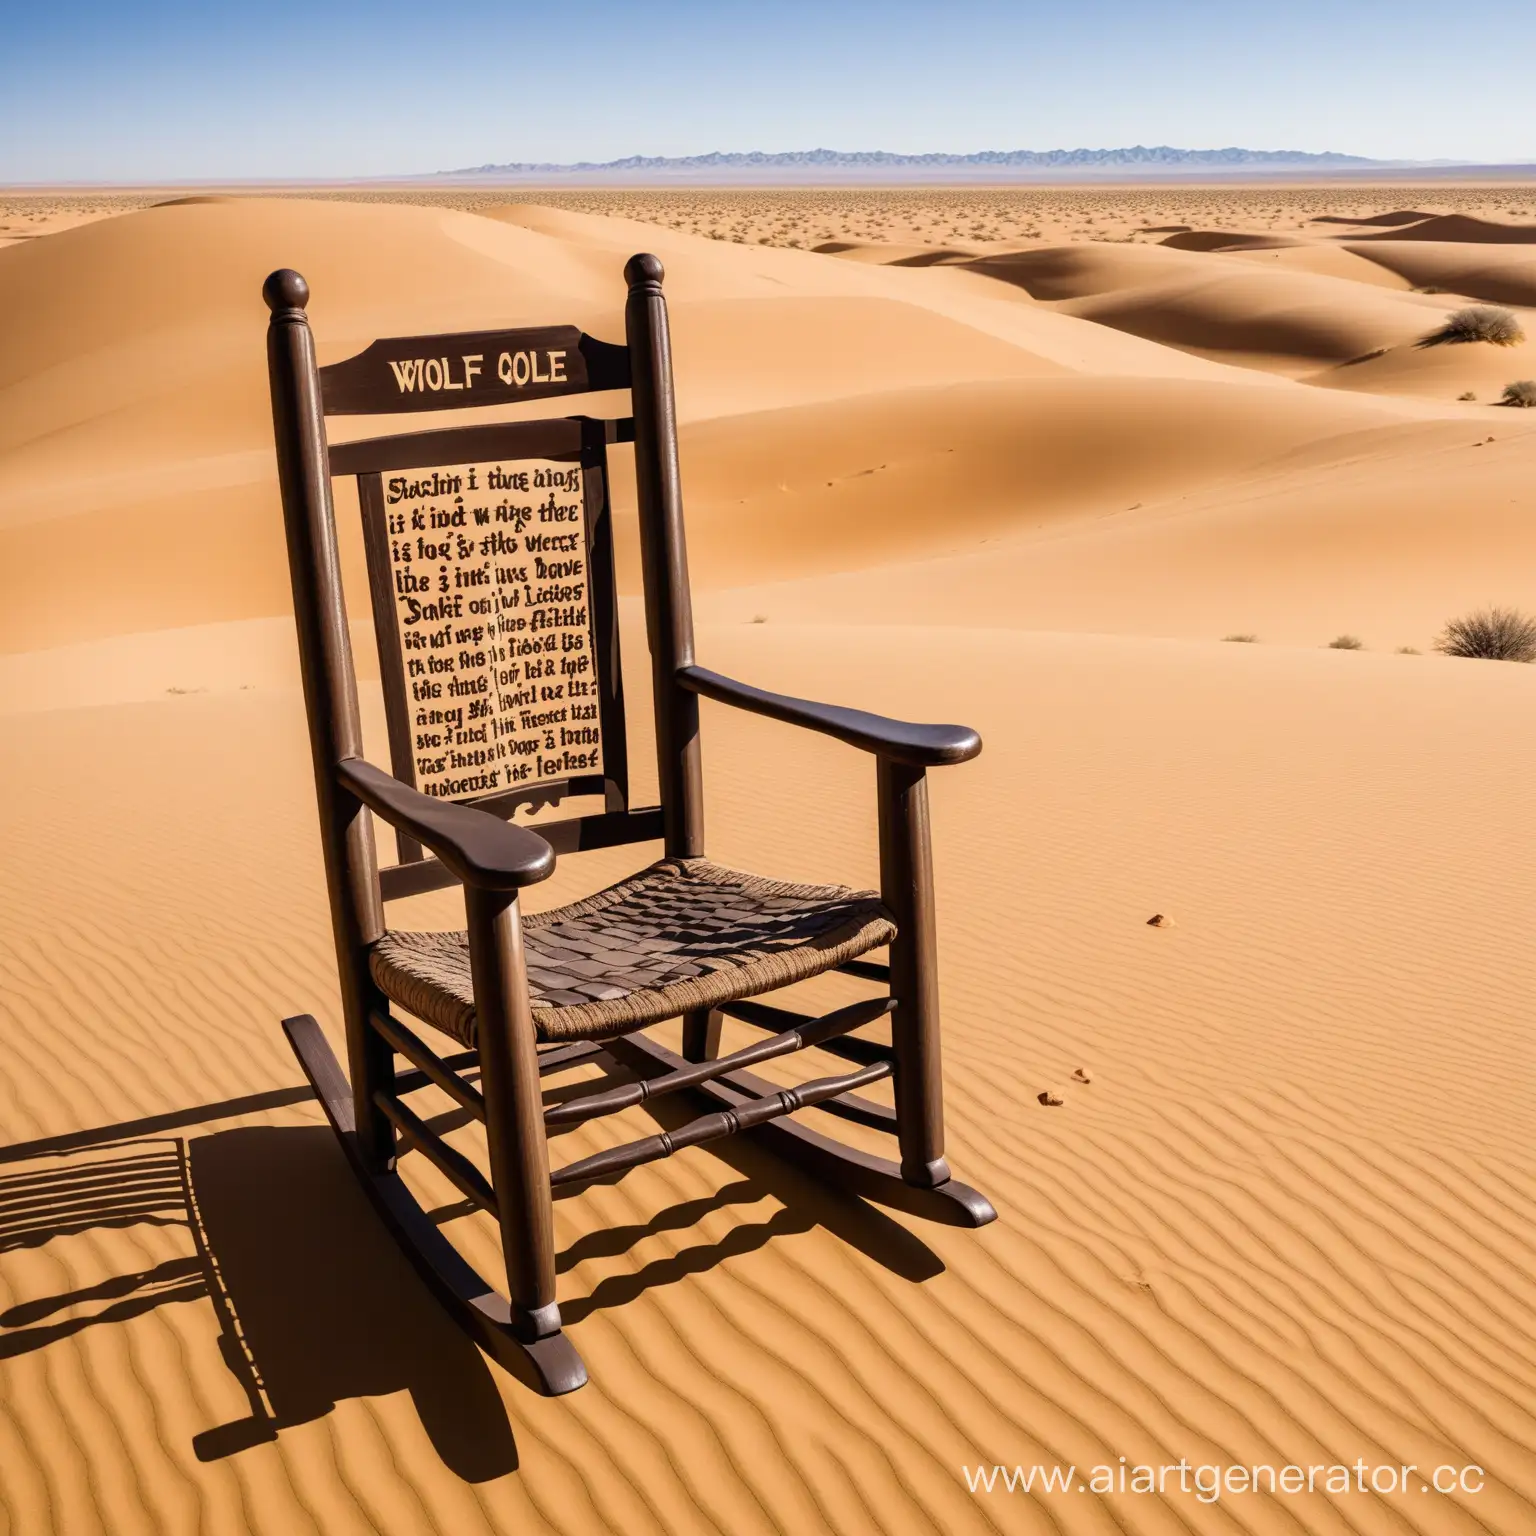 Man-Locked-in-Rocking-Chair-with-Wolf-Quotes-Survives-Desert-Ordeal